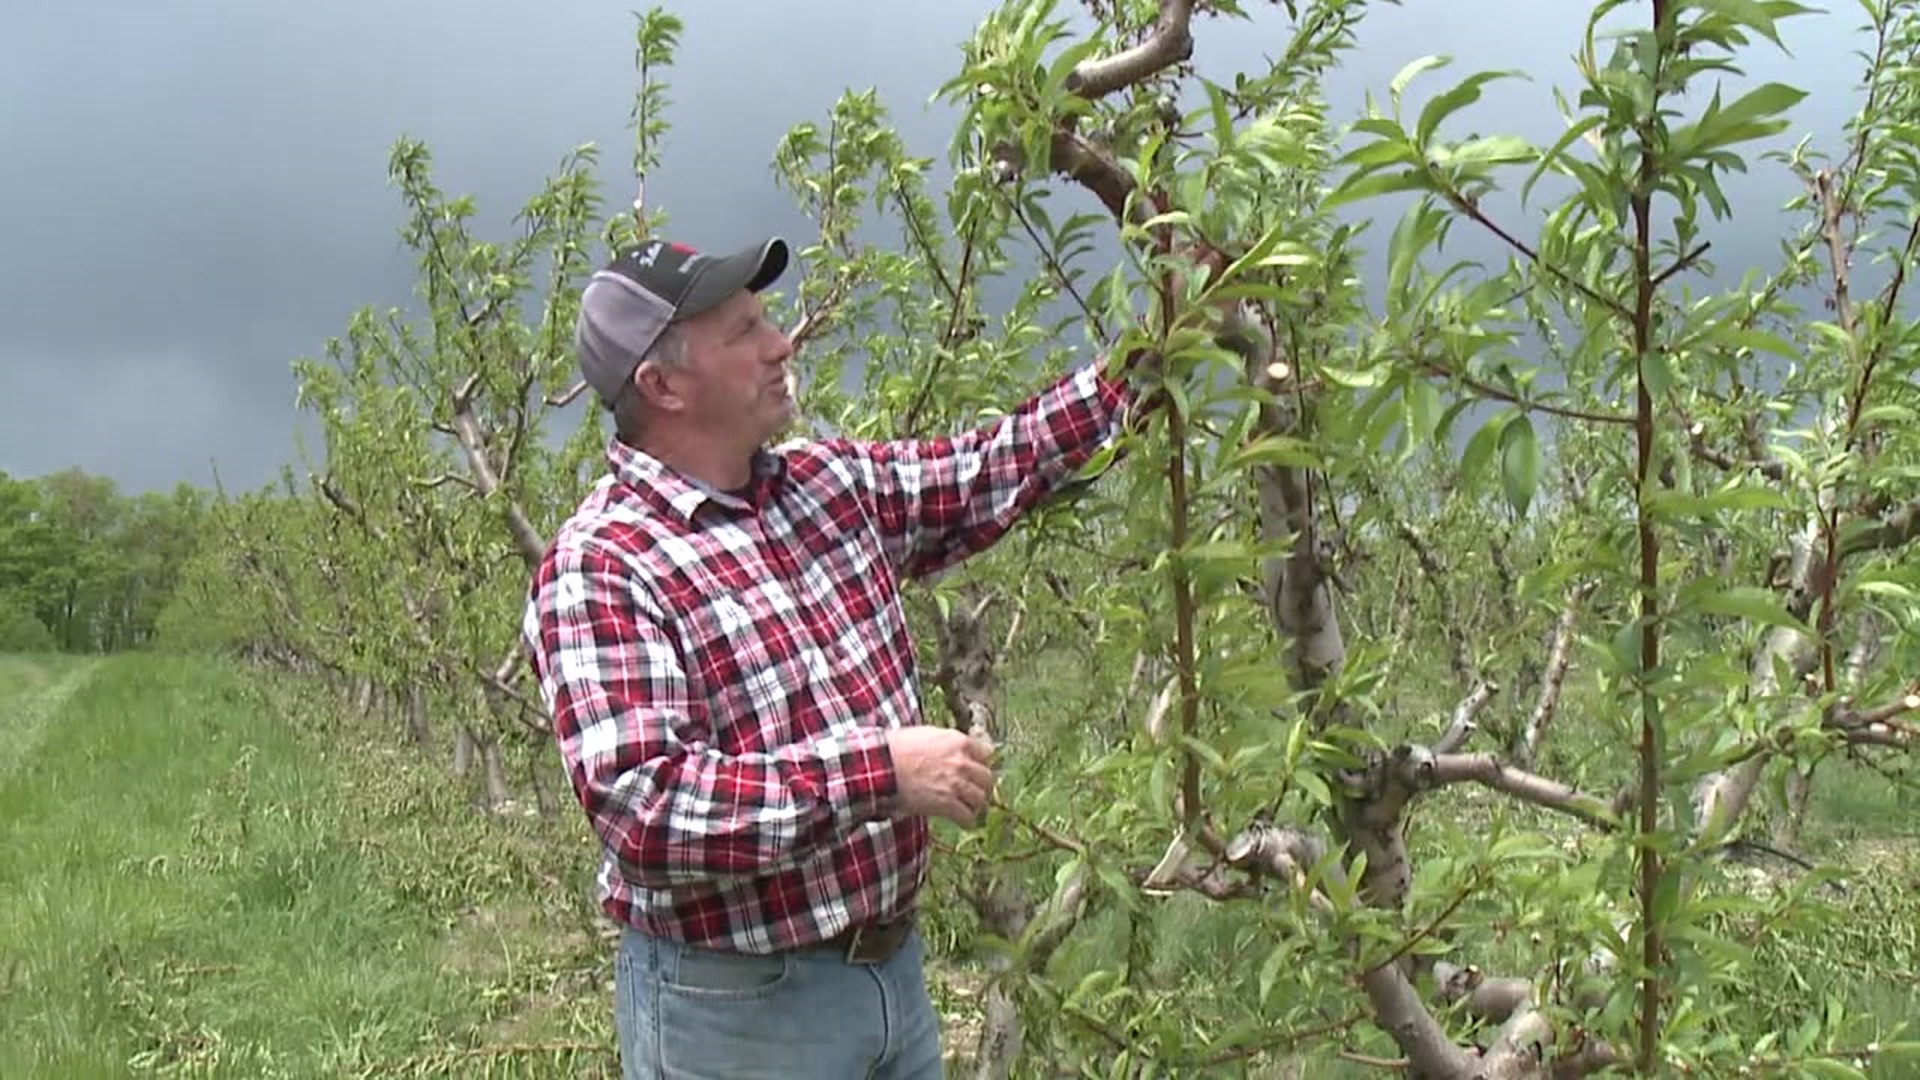 Farmers hope the recent cold overnight temperatures don't damage what looks like a promising fruit crop.